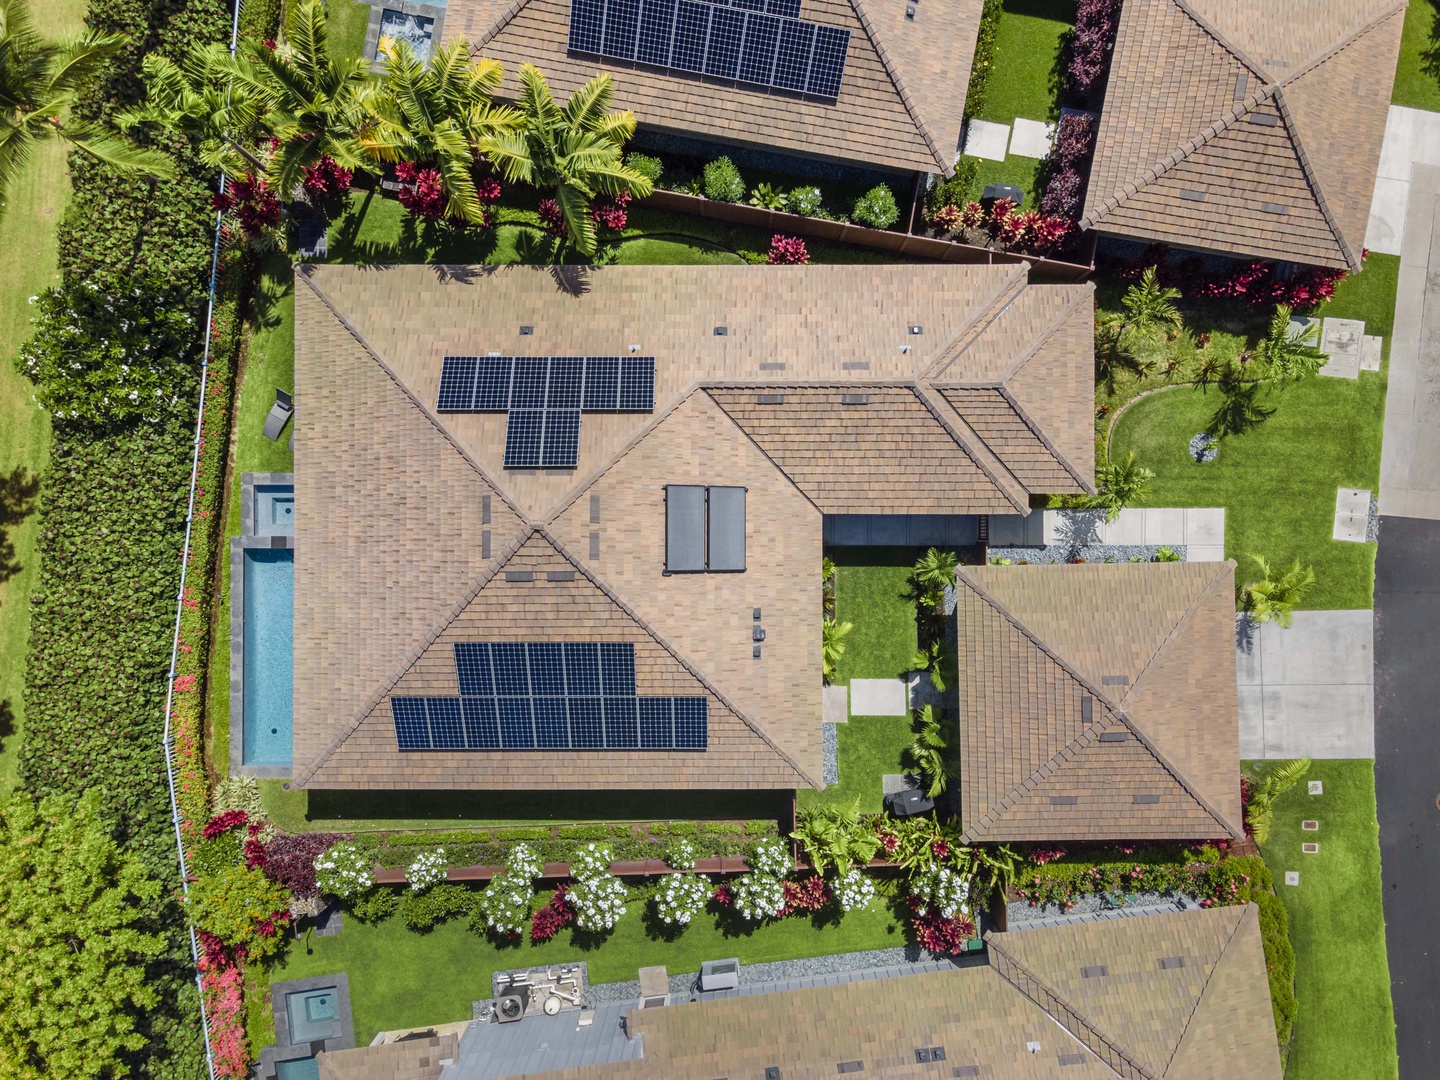 Kailua Kona Vacation Rentals, Holua Kai #27 - Aerial views of the home featuring solar panels as we attempt to lessen our carbon foot print